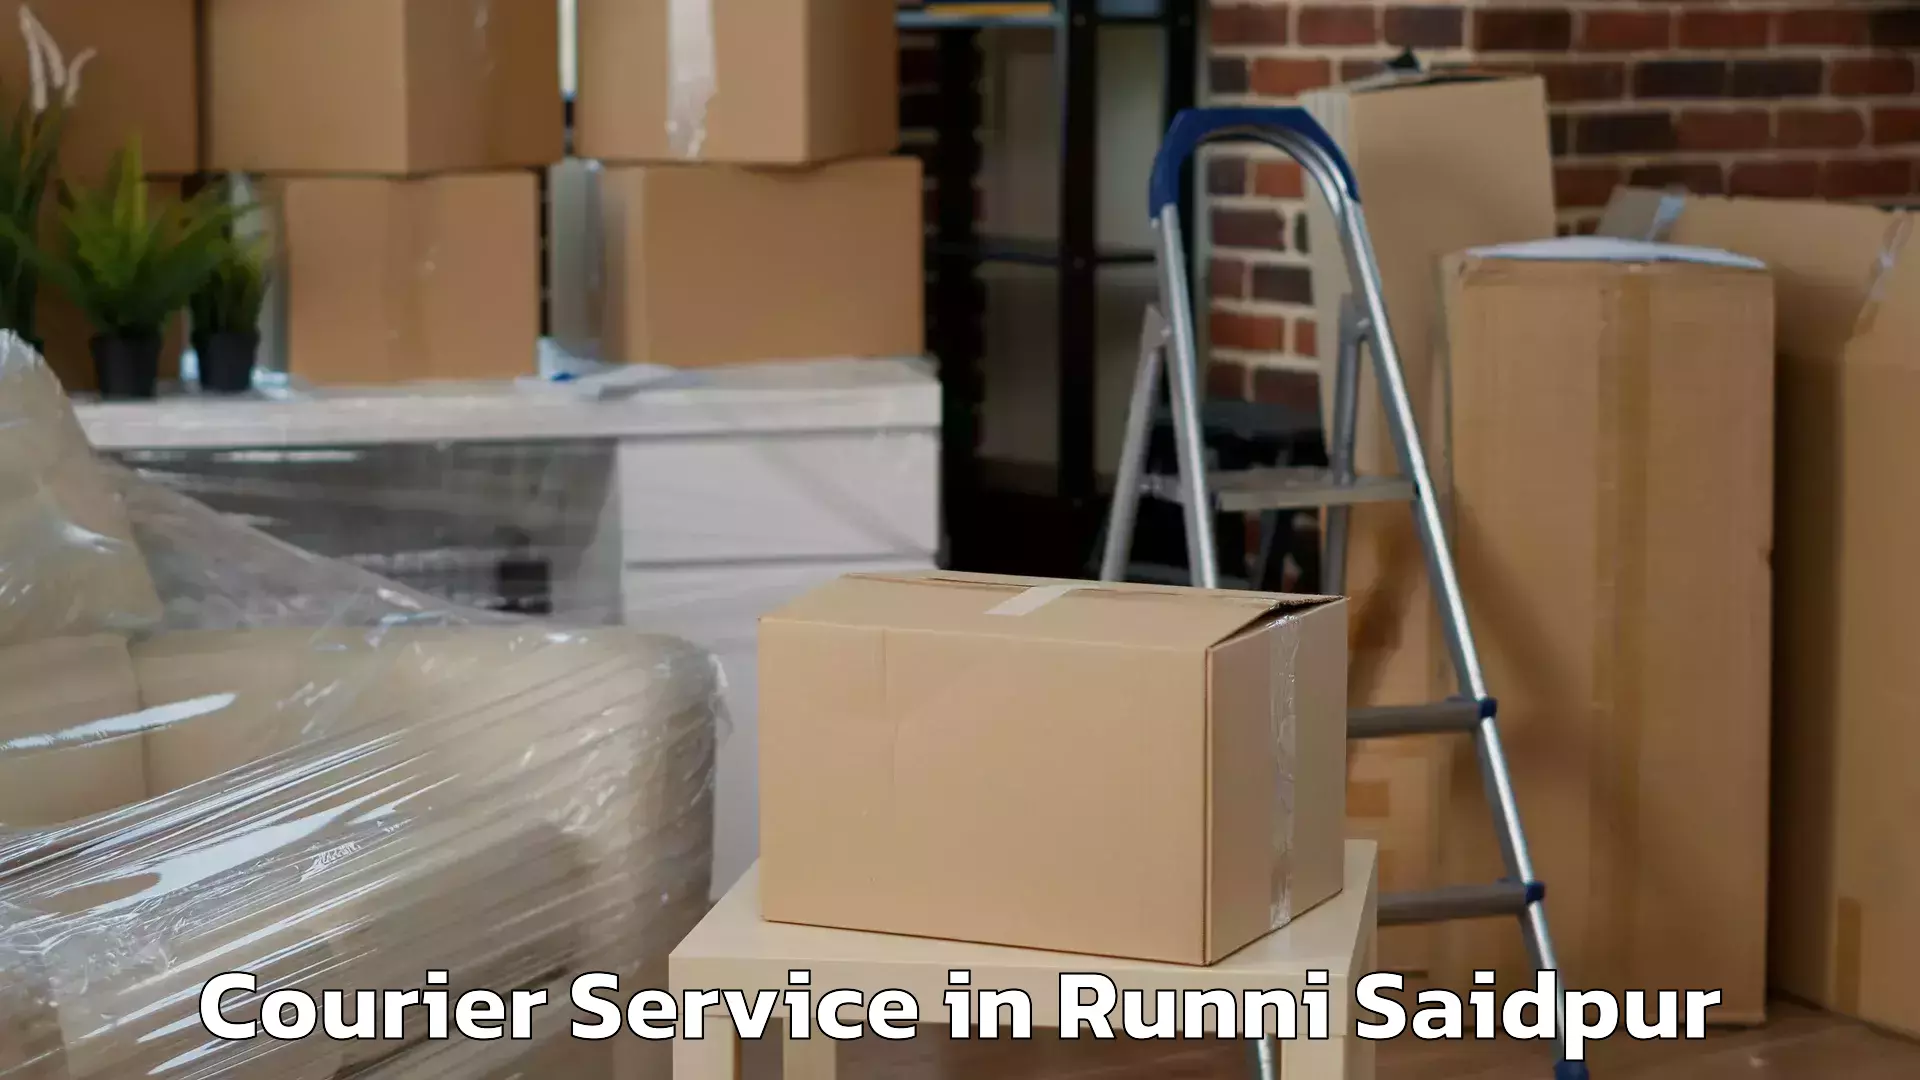 Optimized delivery routes in Runni Saidpur